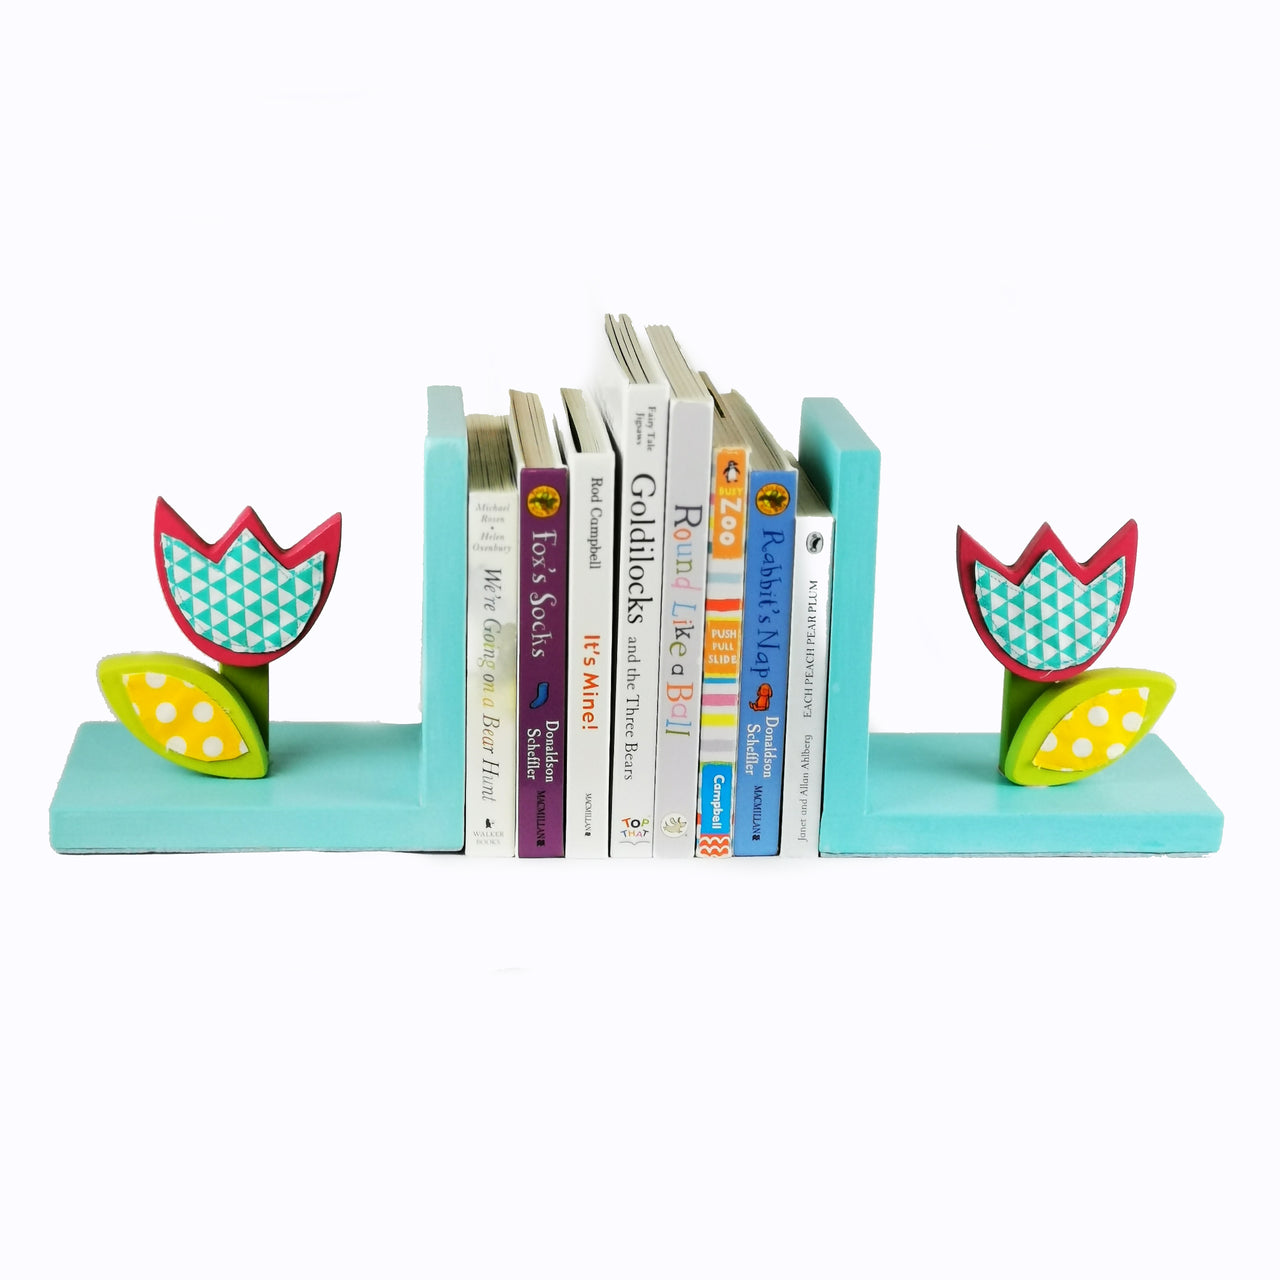 Designed and hand-crafted in Italy, these bookends with a light blue wooden base and a flower design will bring colour and imagination to your child's bedroom.